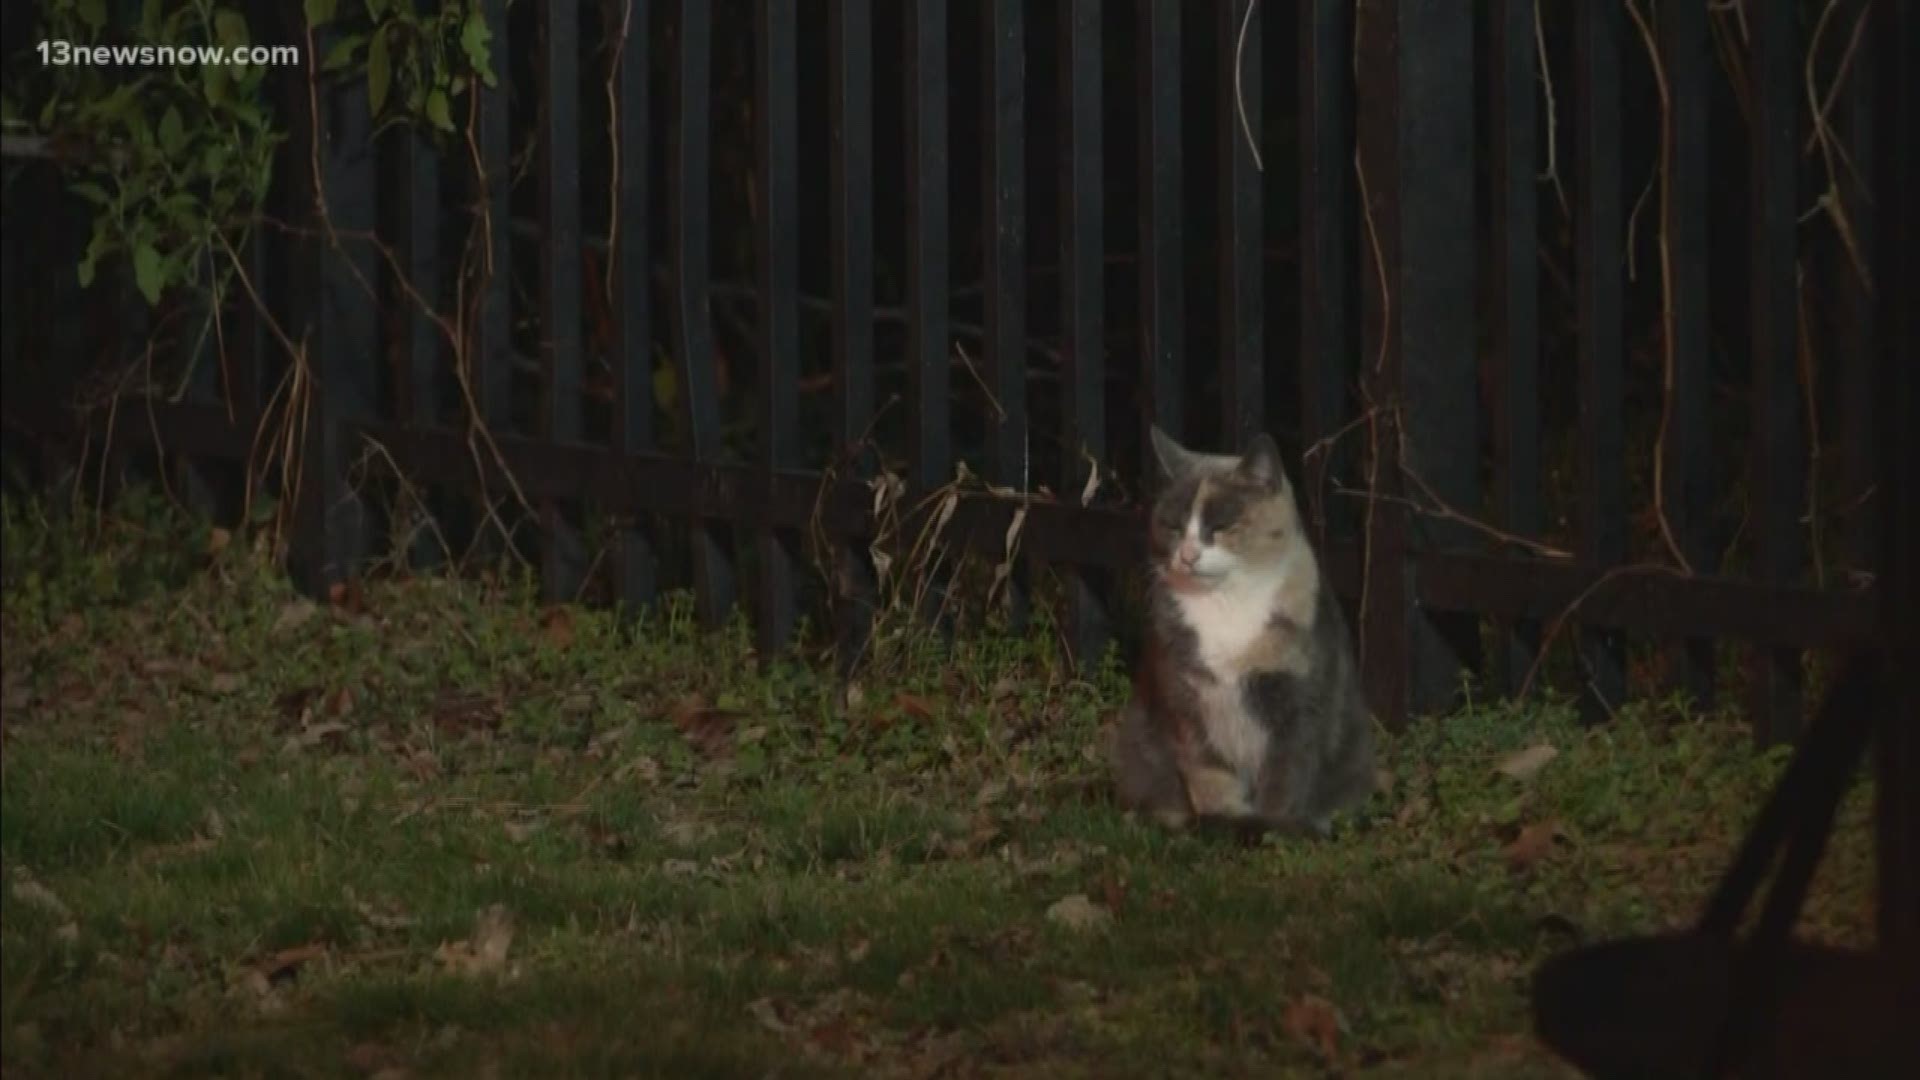 Dozens of cats have made Christopher Newport Park their home. City officials said the cats need to go because they don't fit into new development plans.